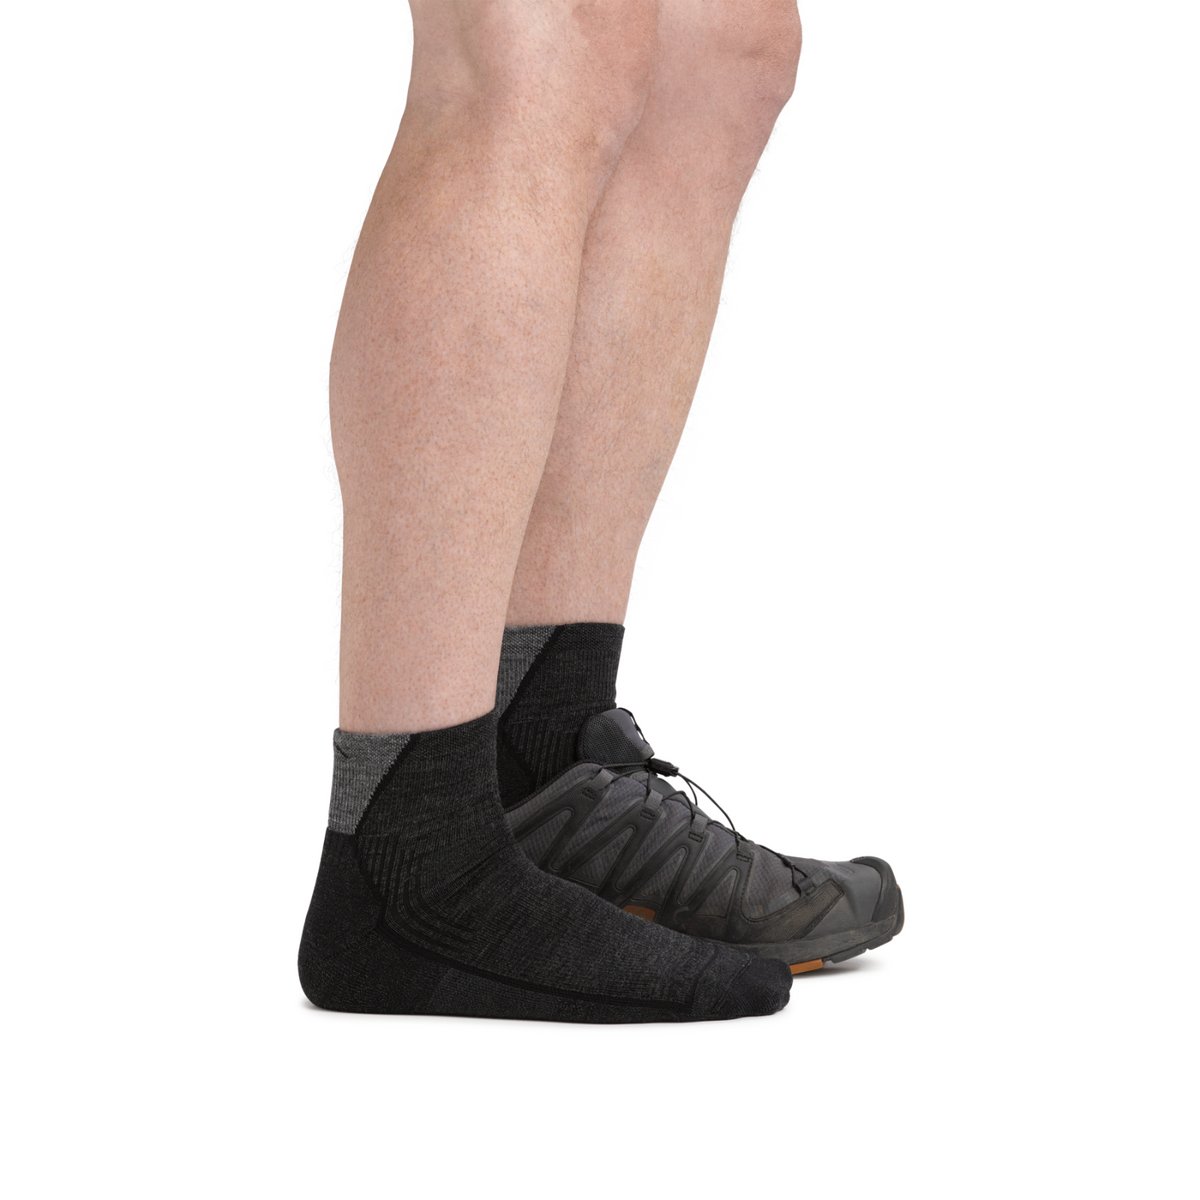 Darn Tough 1959 Quarter Height Midweight with Cushion Hike Men&#39;s Sock in black worn by model seen from the side